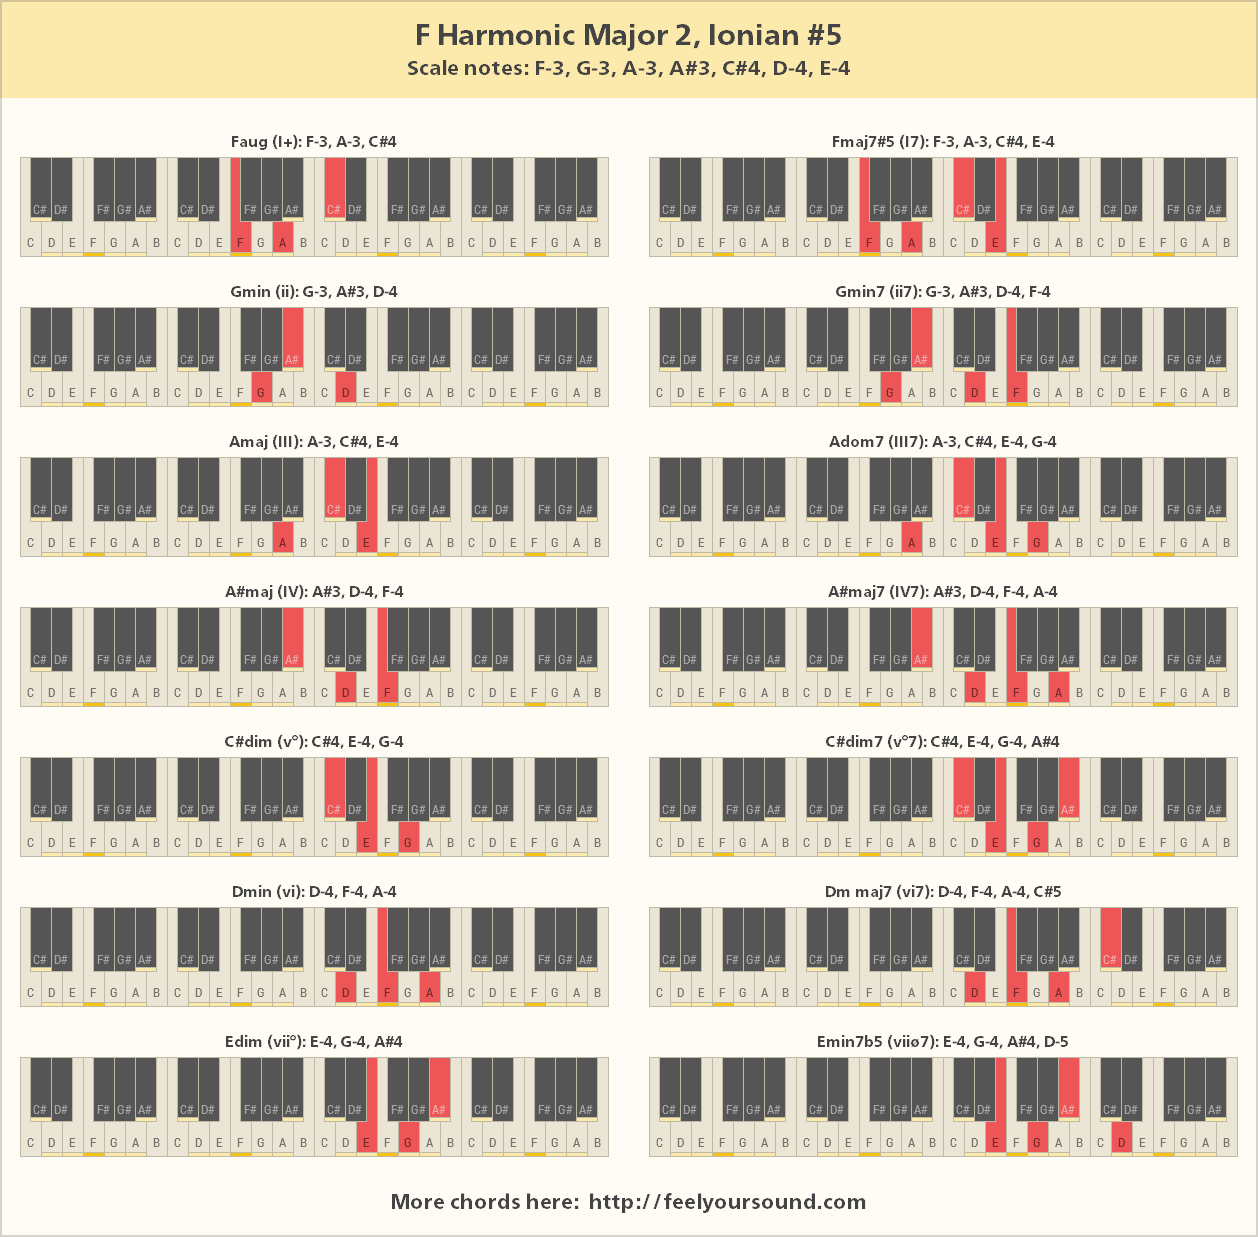 All important chords of F Harmonic Major 2, Ionian #5